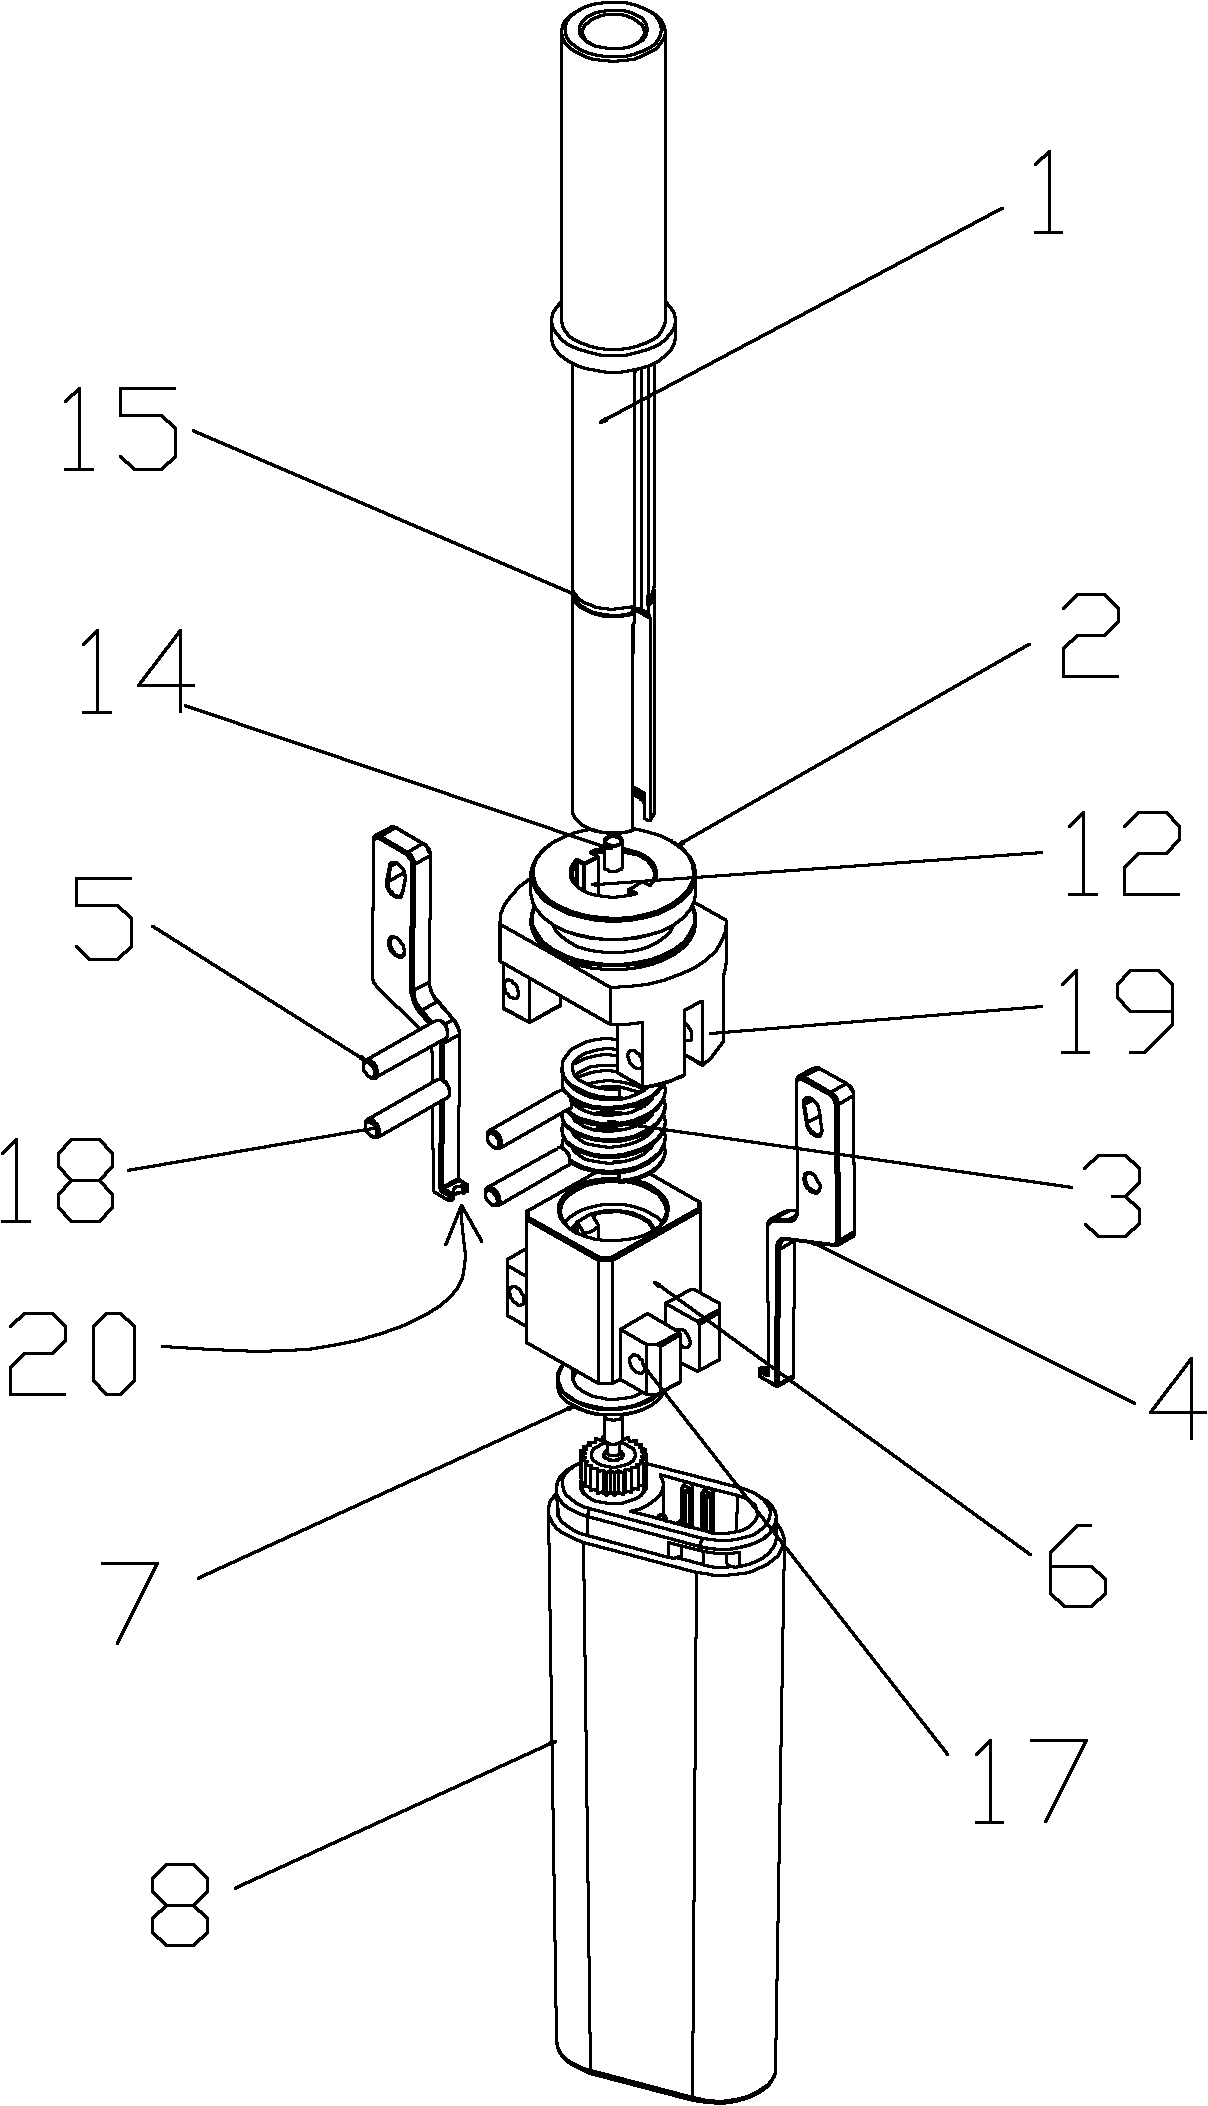 Device for detecting and adjusting gas outlet flow of lighter